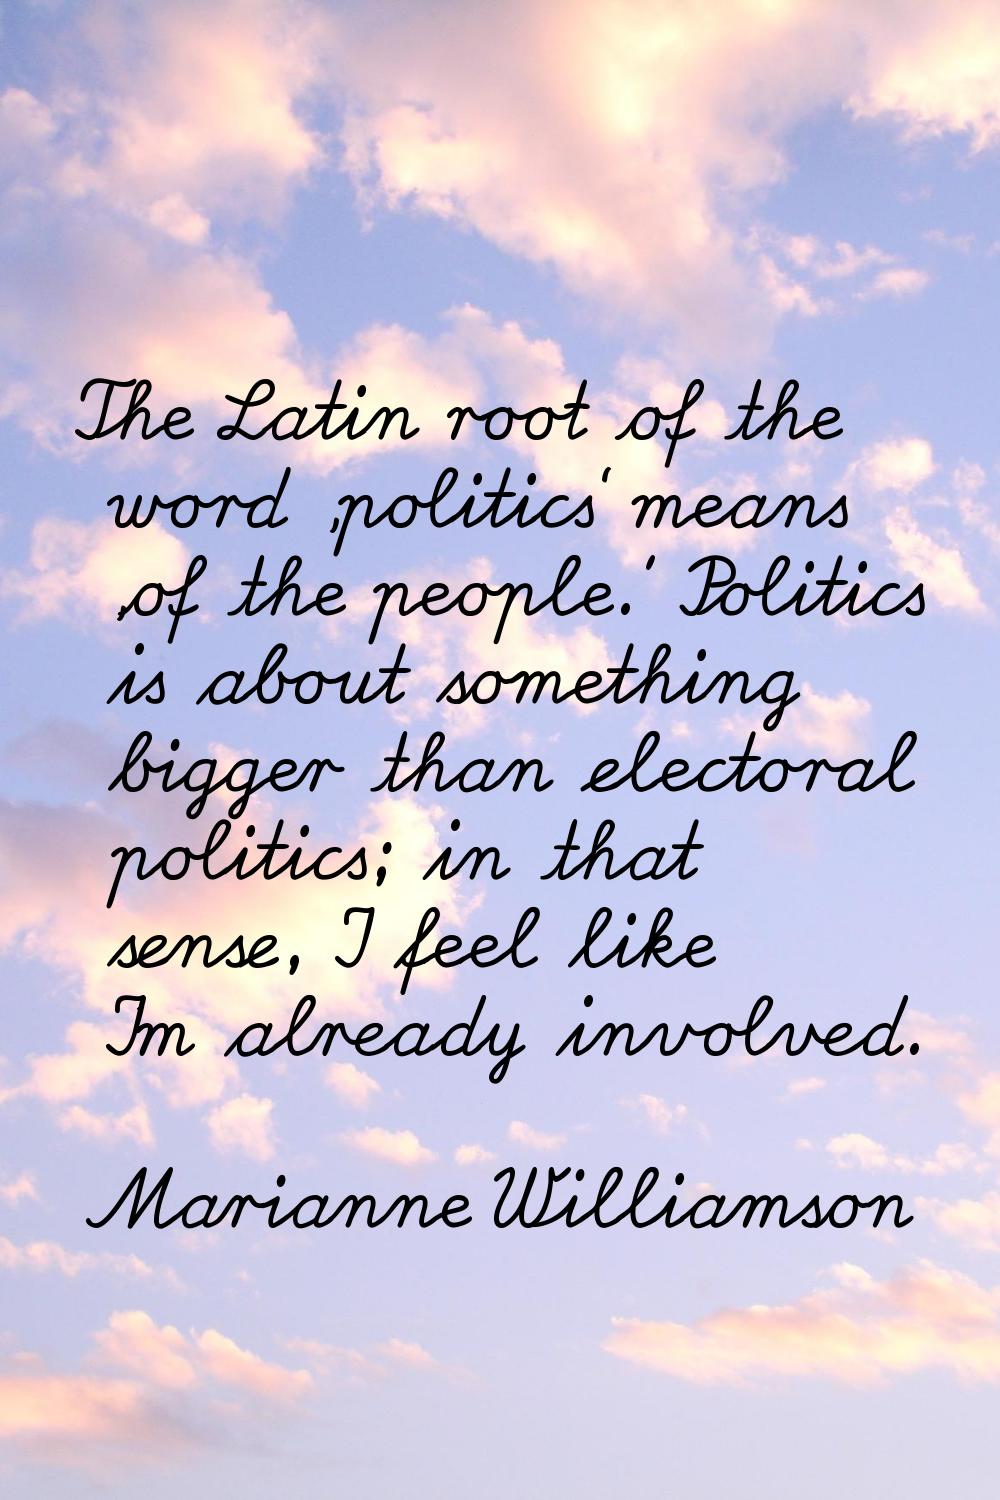 The Latin root of the word 'politics' means 'of the people.' Politics is about something bigger tha